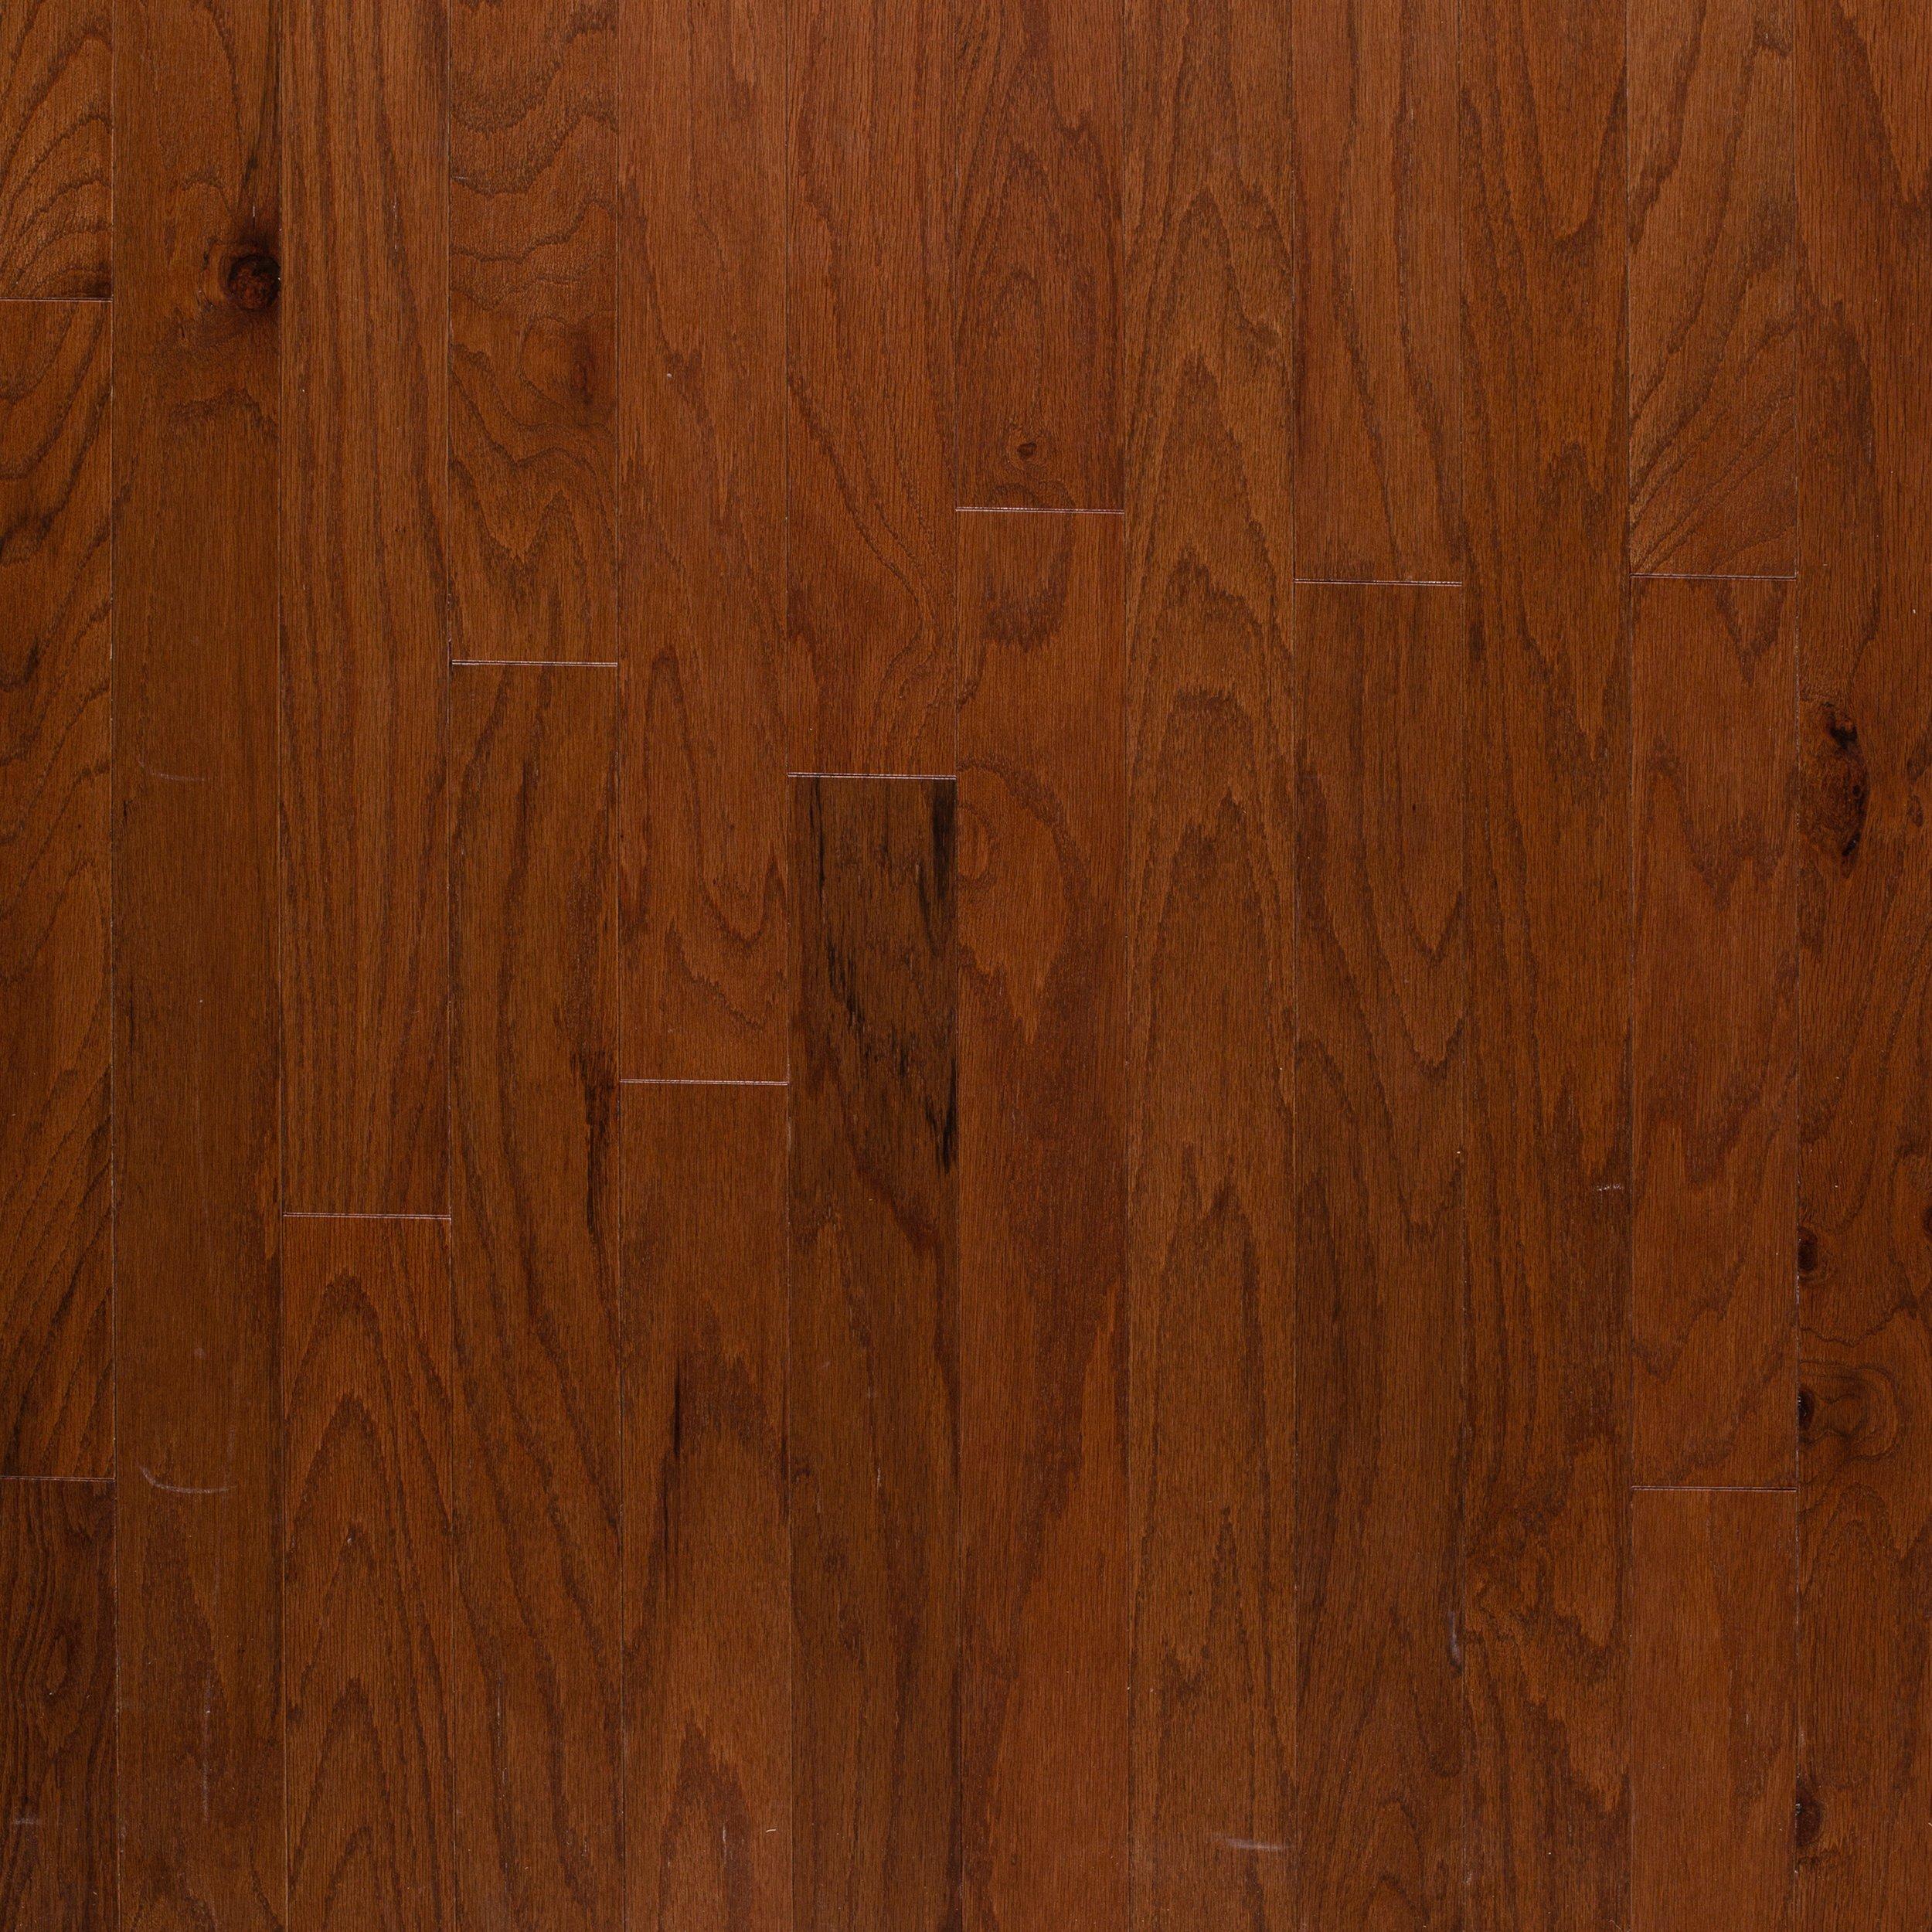 Stock Oak Smooth Engineered Hardwood, How Much Does A Box Of Bruce Hardwood Floor Weigh